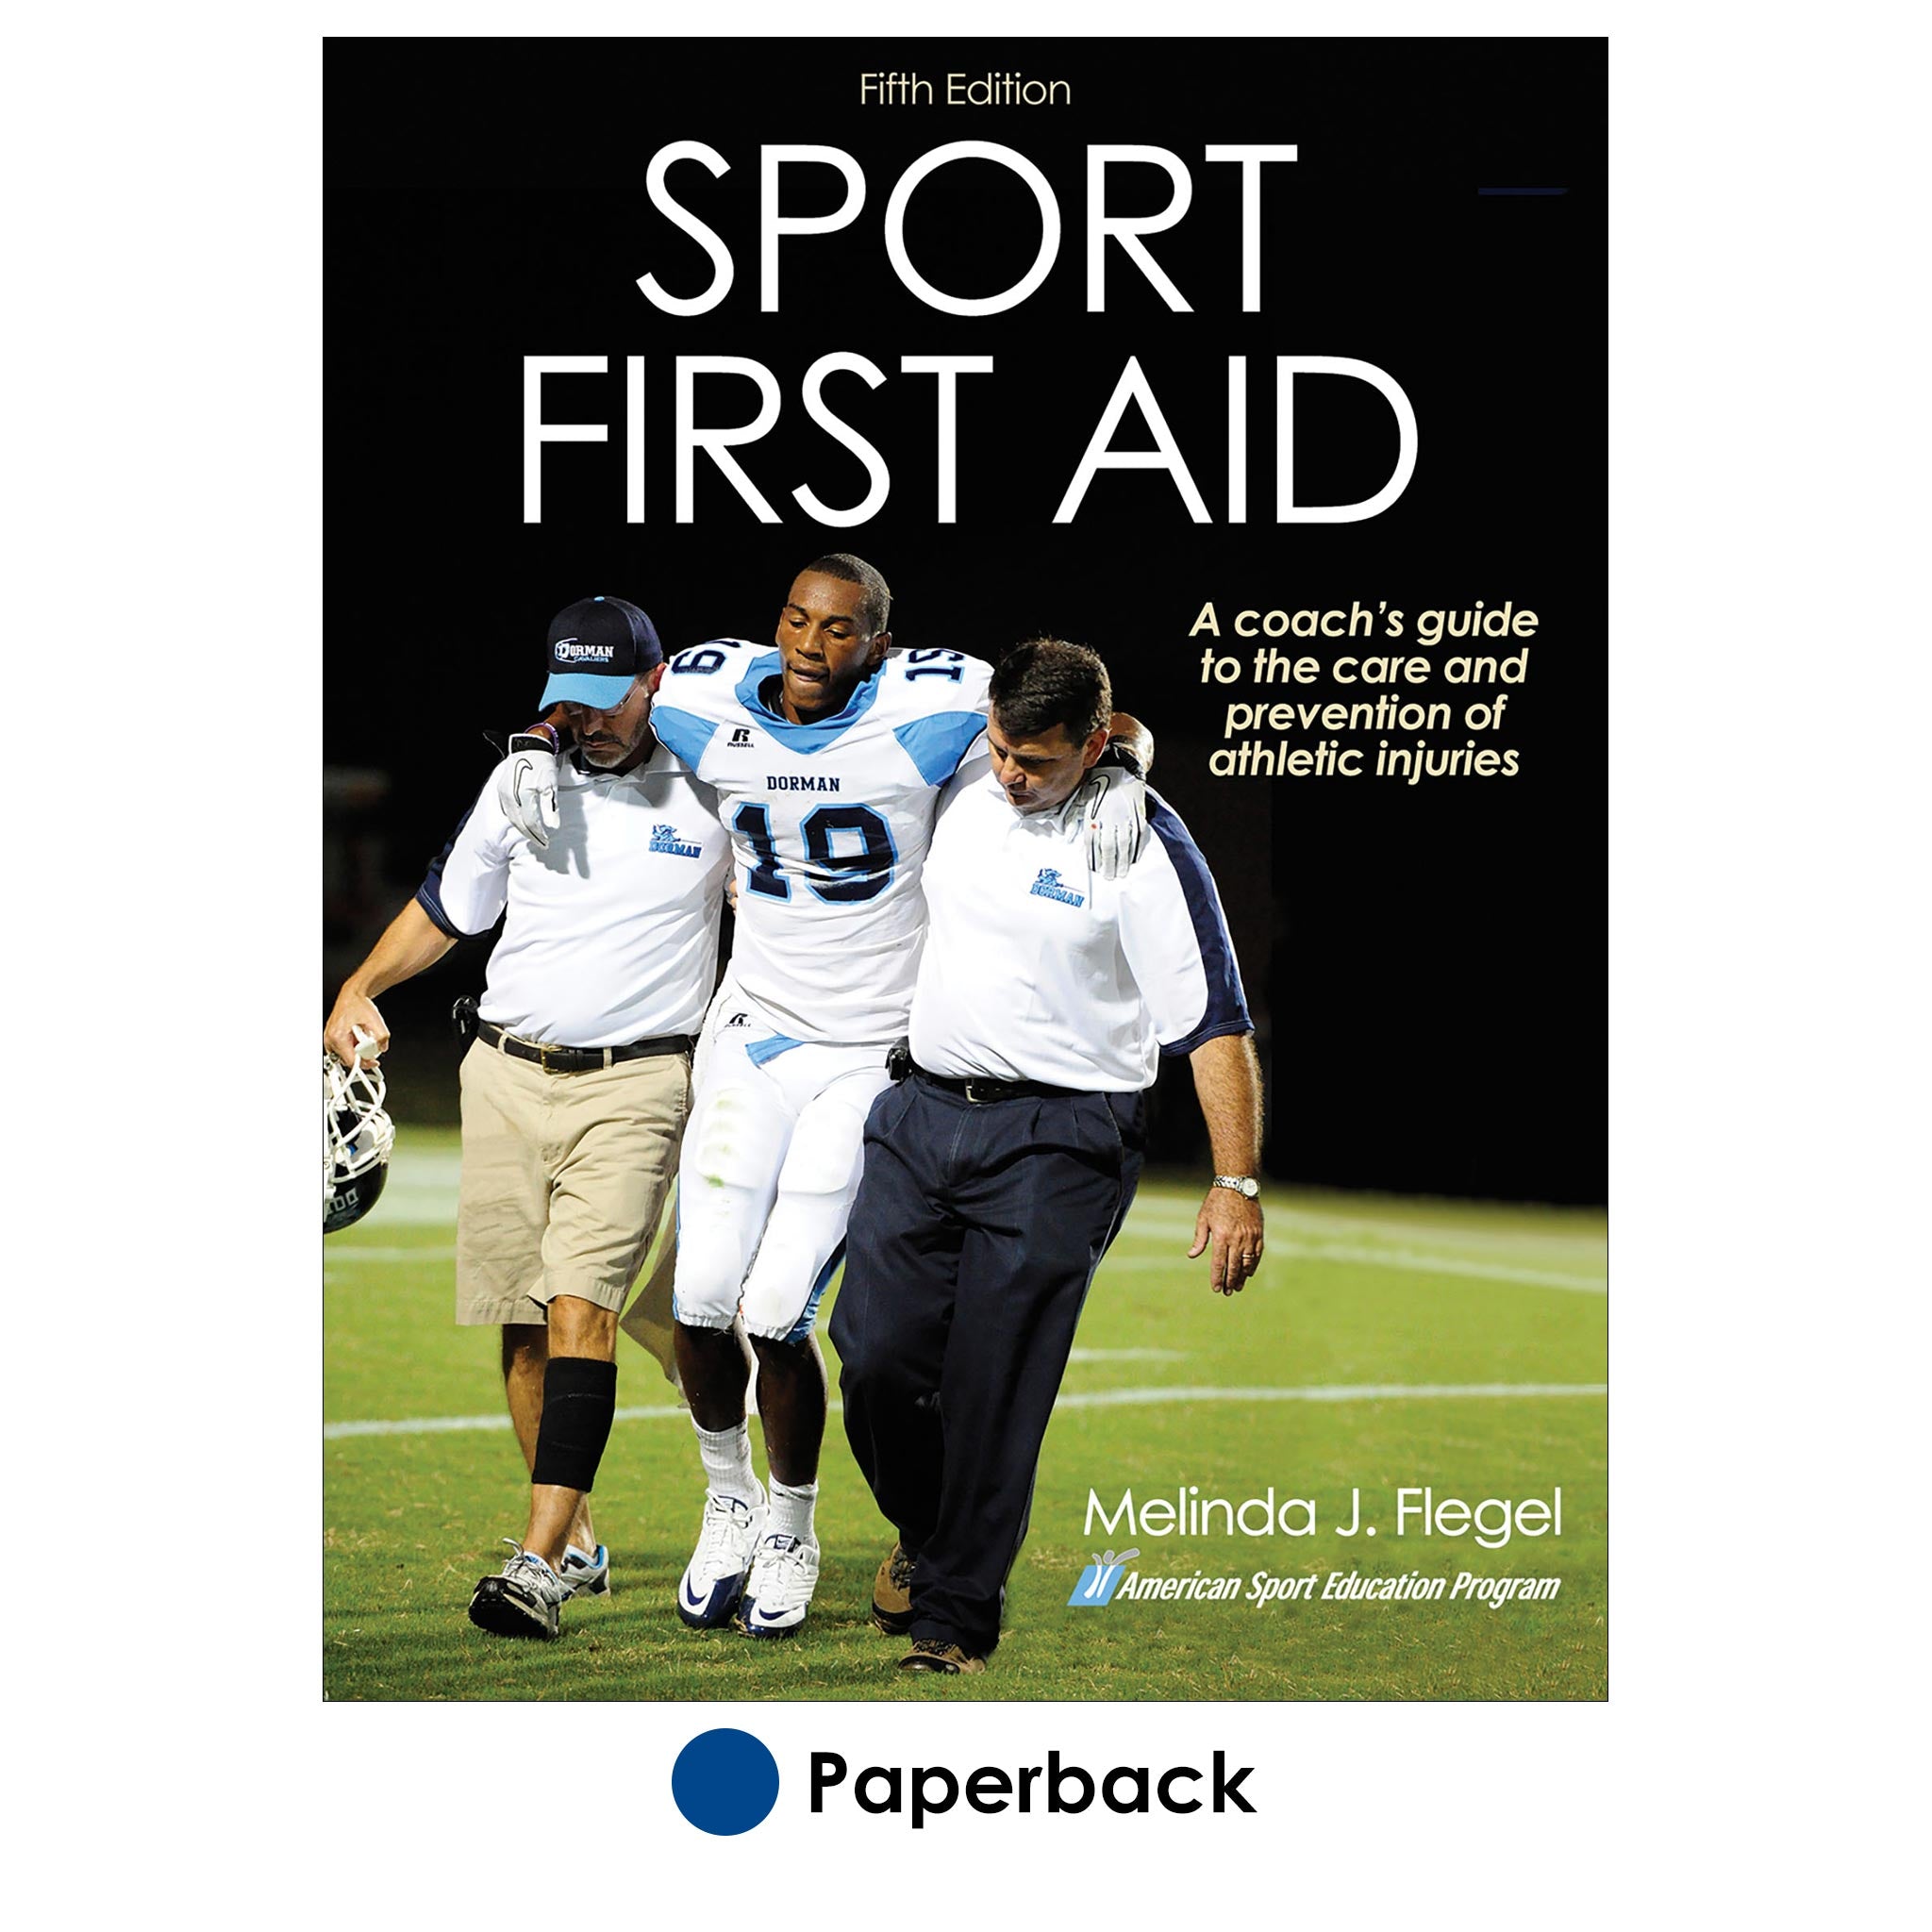 Sport First Aid-5th Edition